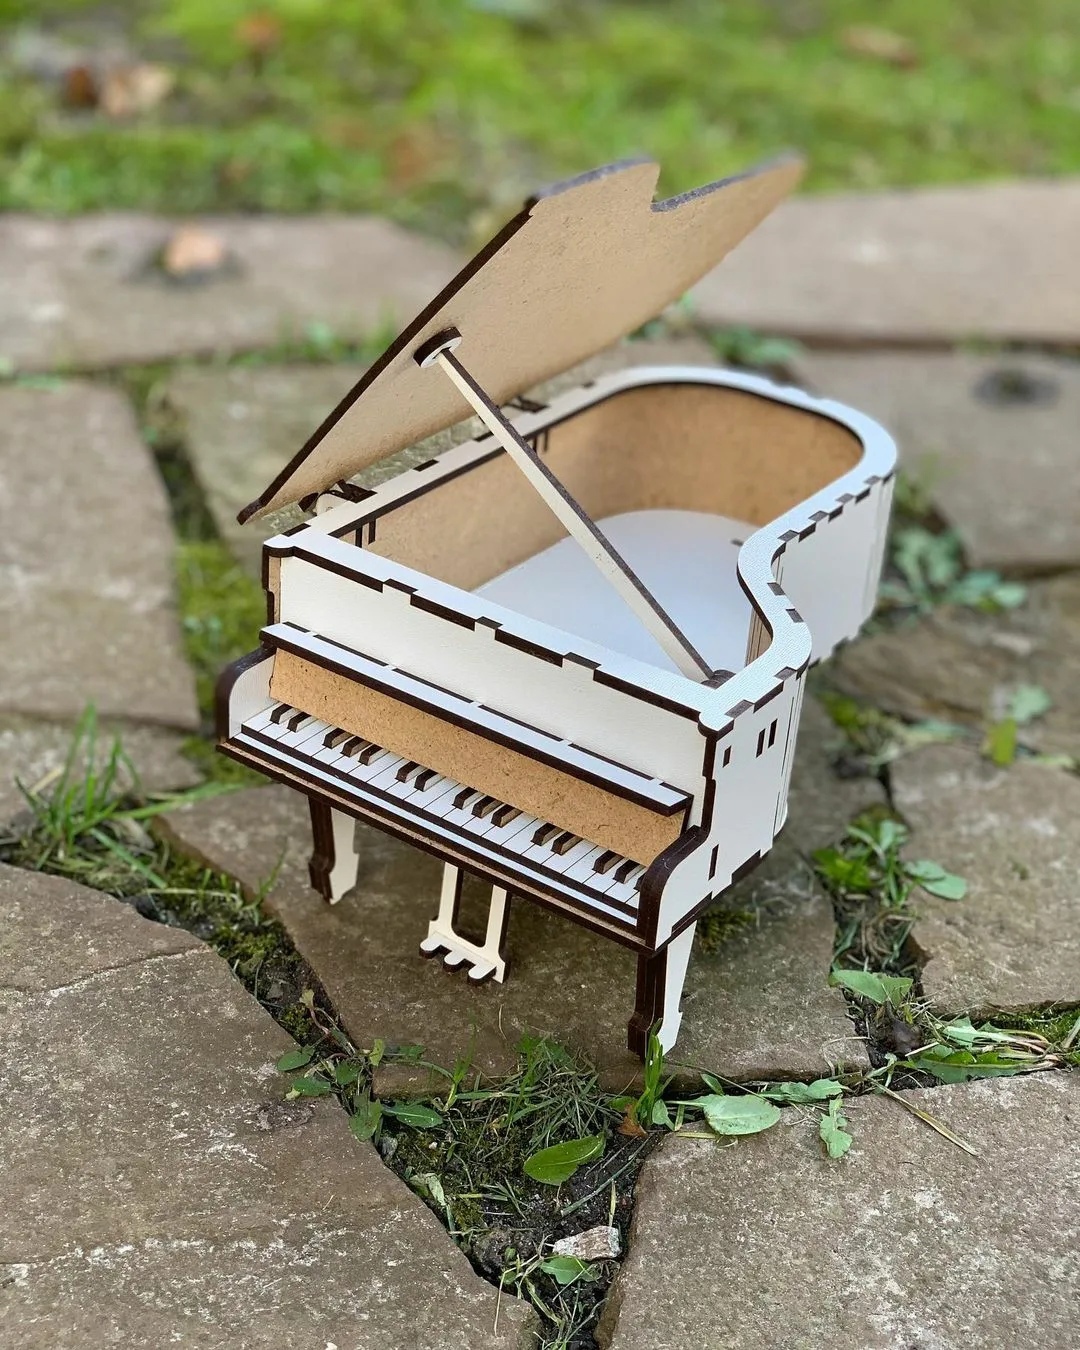 Laser Cut Piano Musical Toys For Kids Free Vector cdr Download